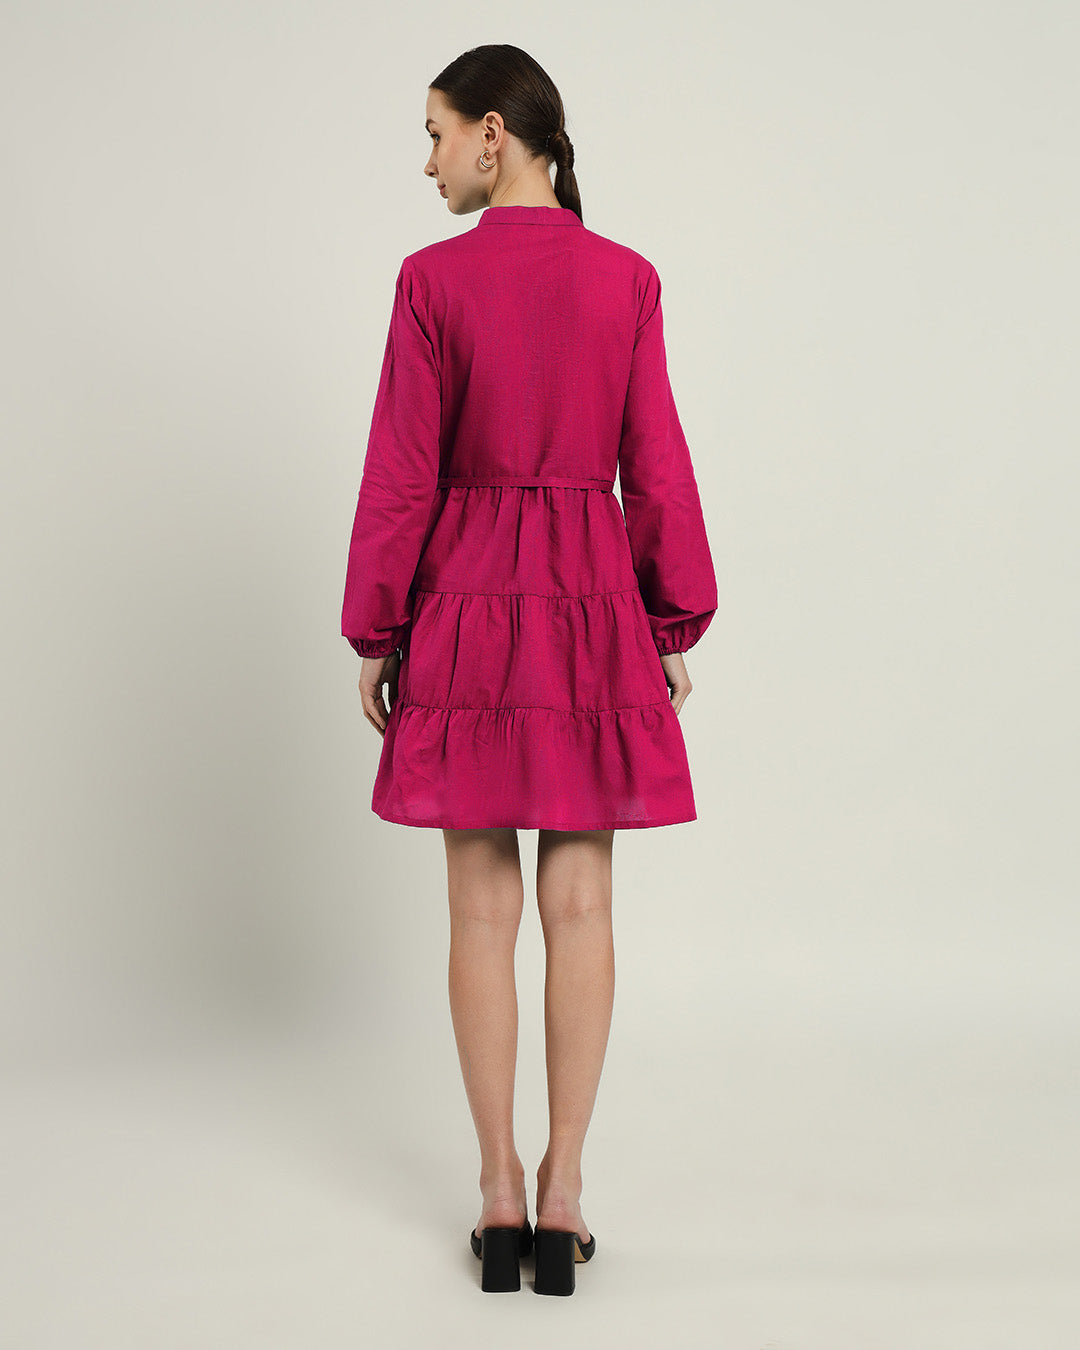 The Ely Berry Cotton Dress